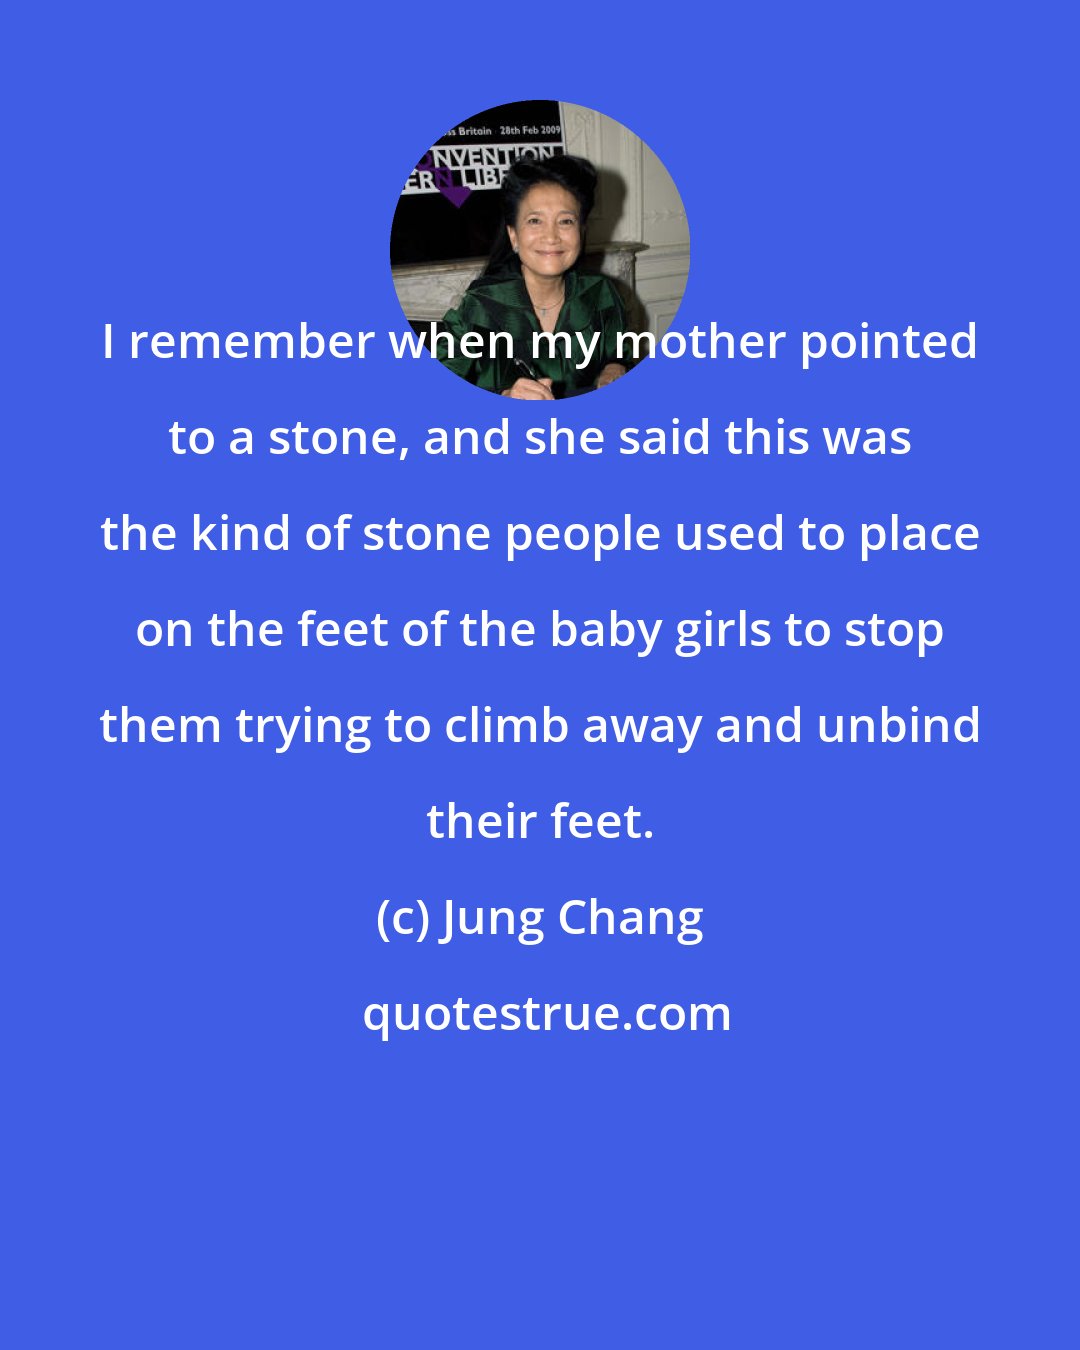 Jung Chang: I remember when my mother pointed to a stone, and she said this was the kind of stone people used to place on the feet of the baby girls to stop them trying to climb away and unbind their feet.